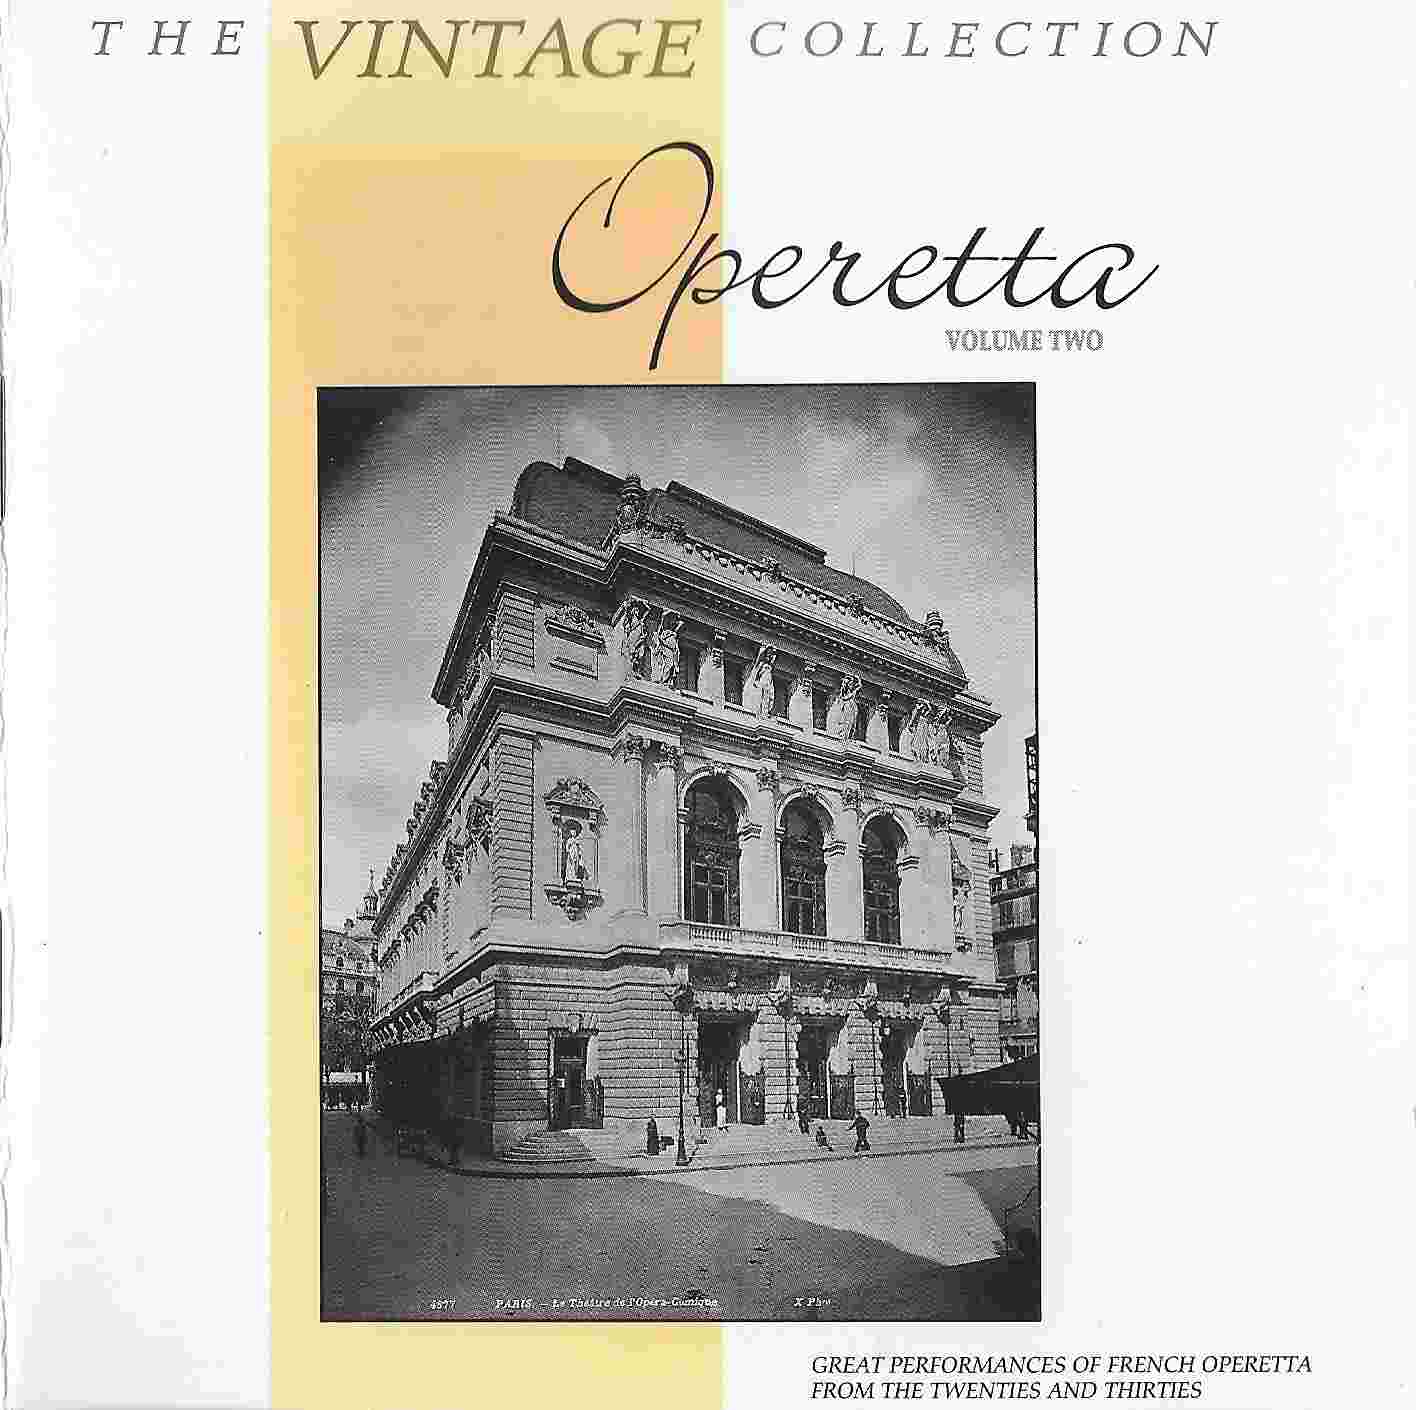 Picture of The vintage collection - Operetta volume 2 by artist Various from the BBC cds - Records and Tapes library